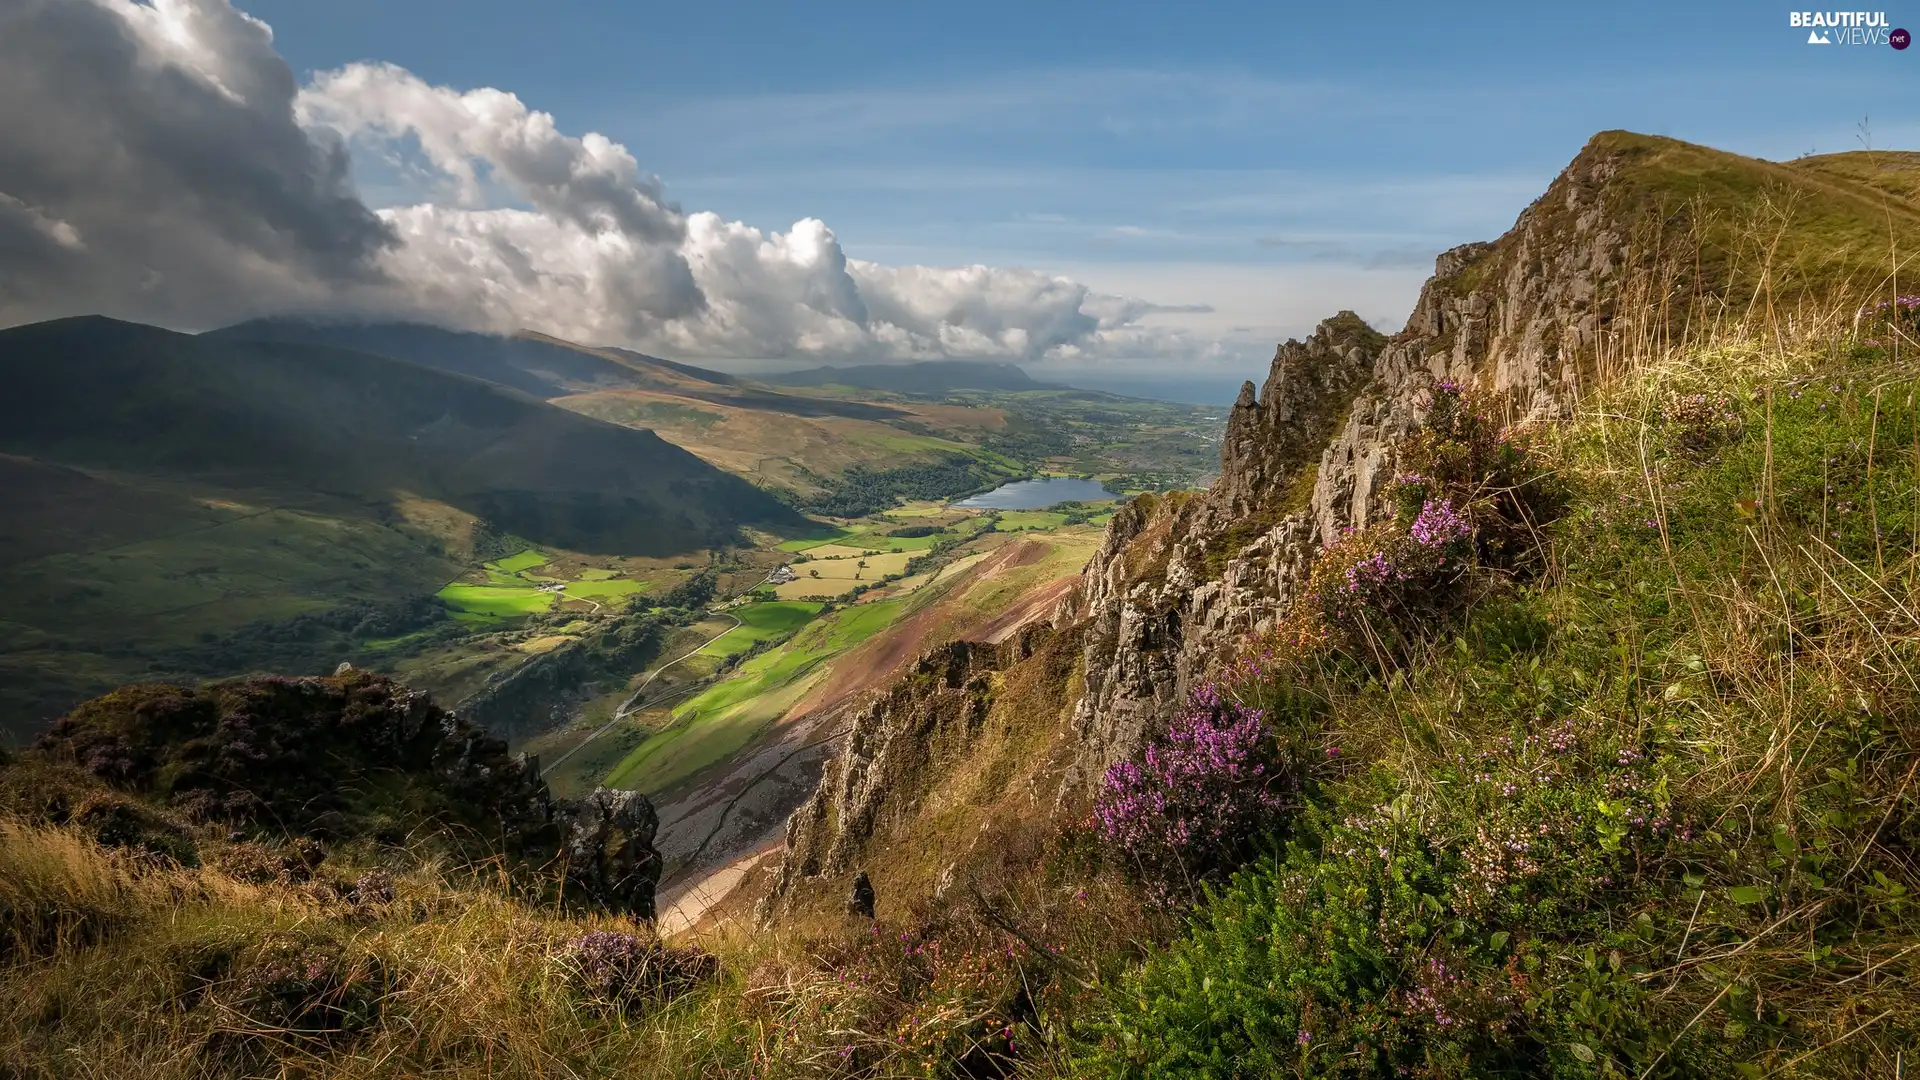 Snowdonia National Park, Mountains, clouds, Peak of Mynydd Mawr, Valley, Nantlle Valley, wales, Plants